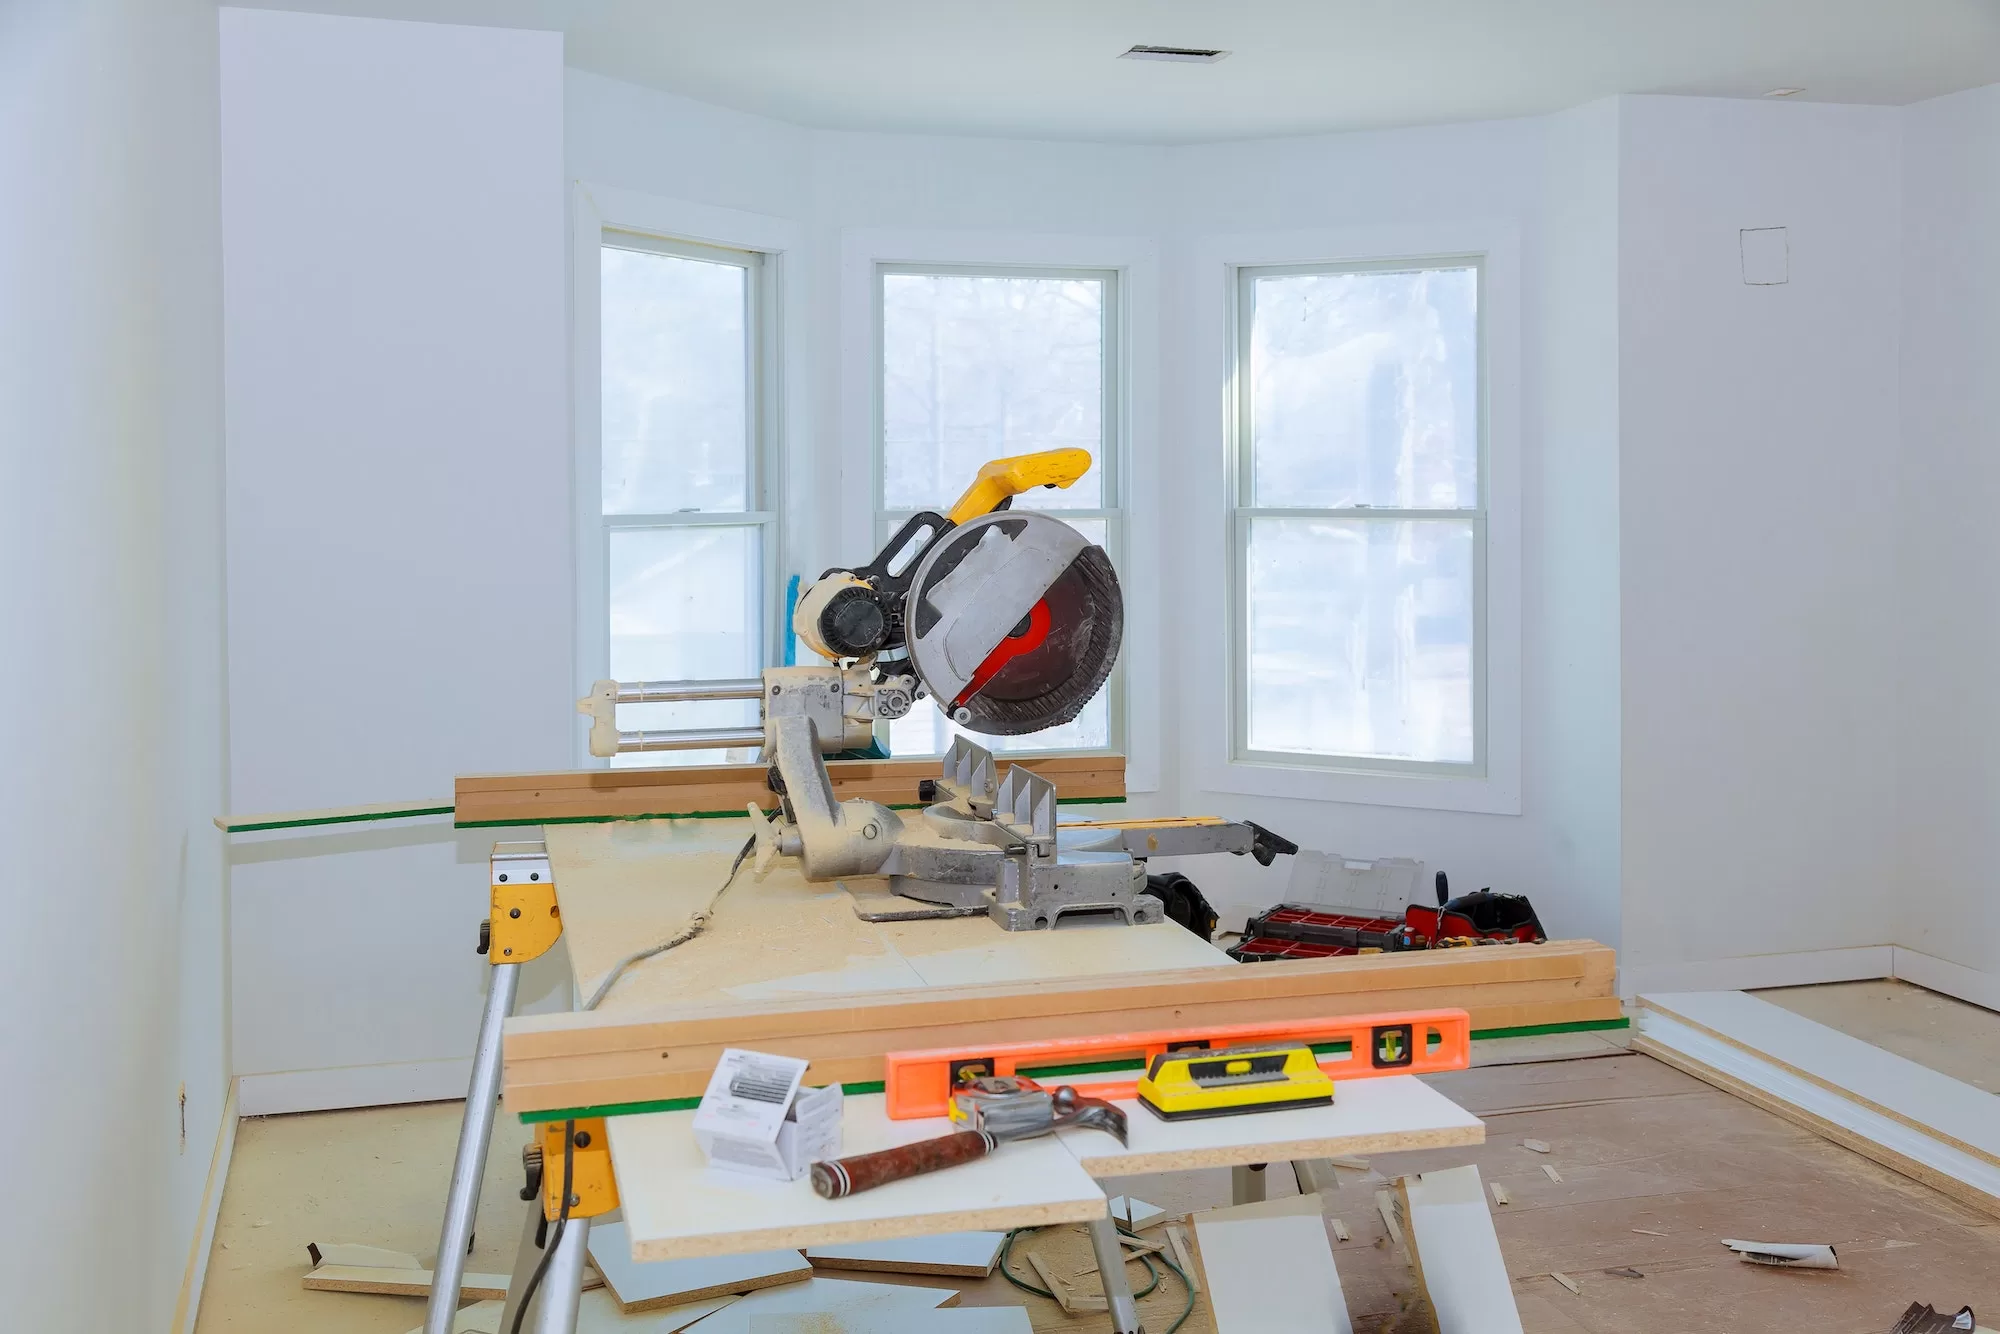 cutting wood on electric saw Interior construction of housing Construction building industry new